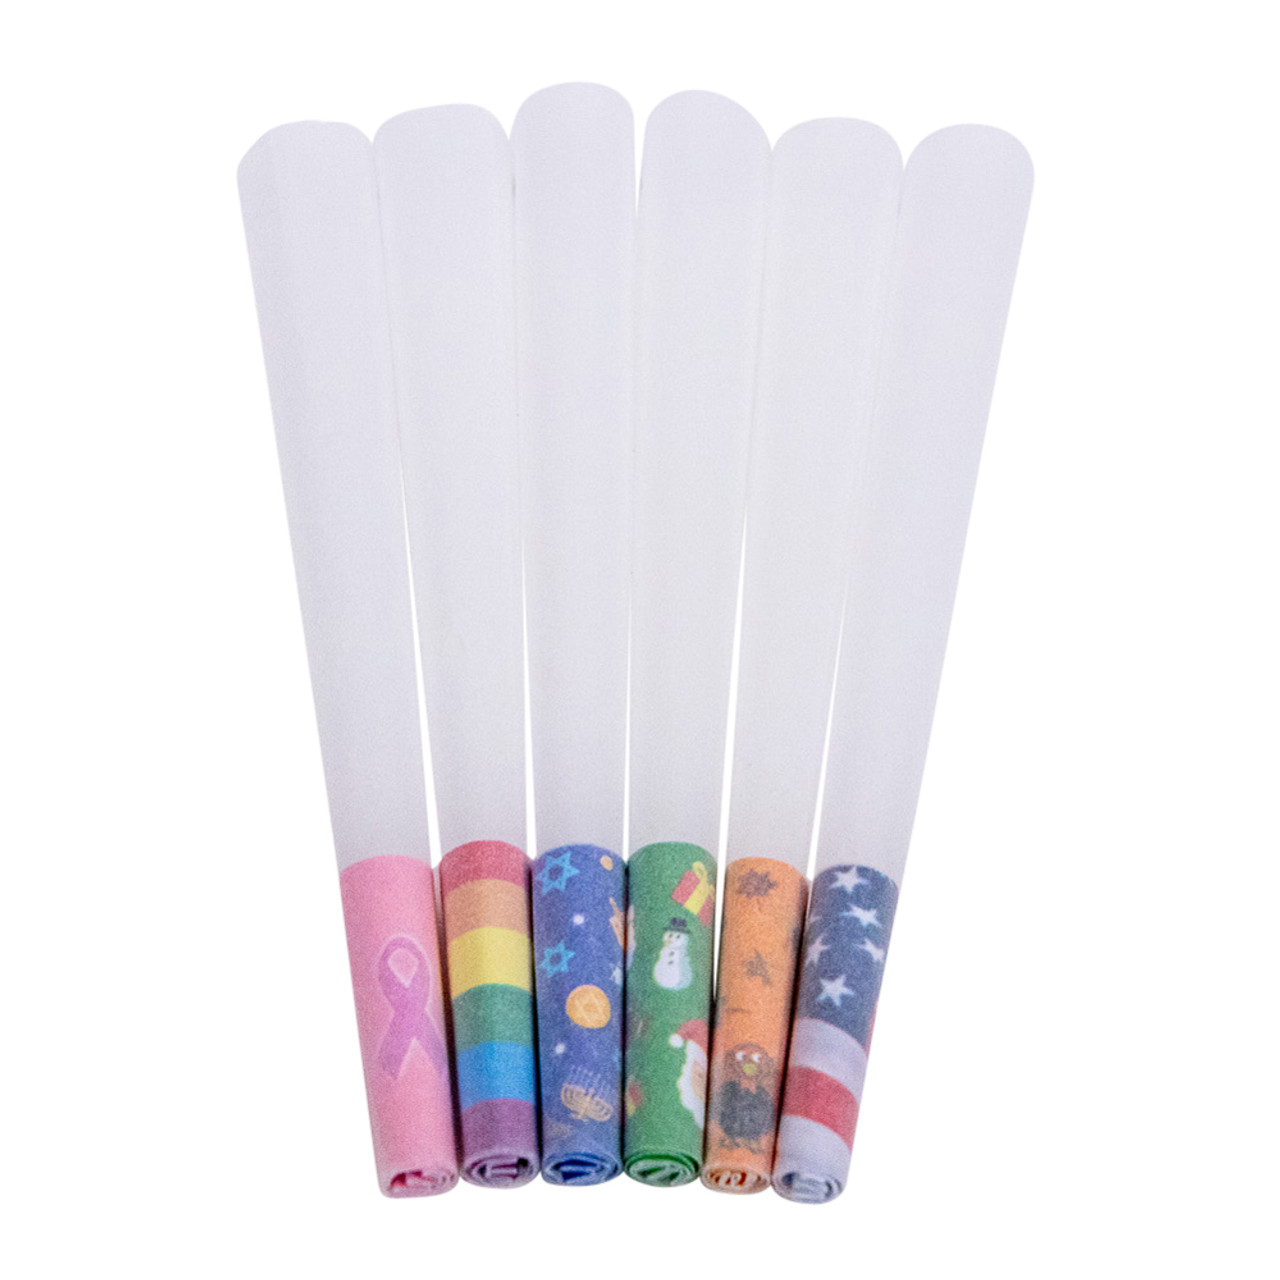 Cotton Candy Paper Cones, 1,000 cones/pack